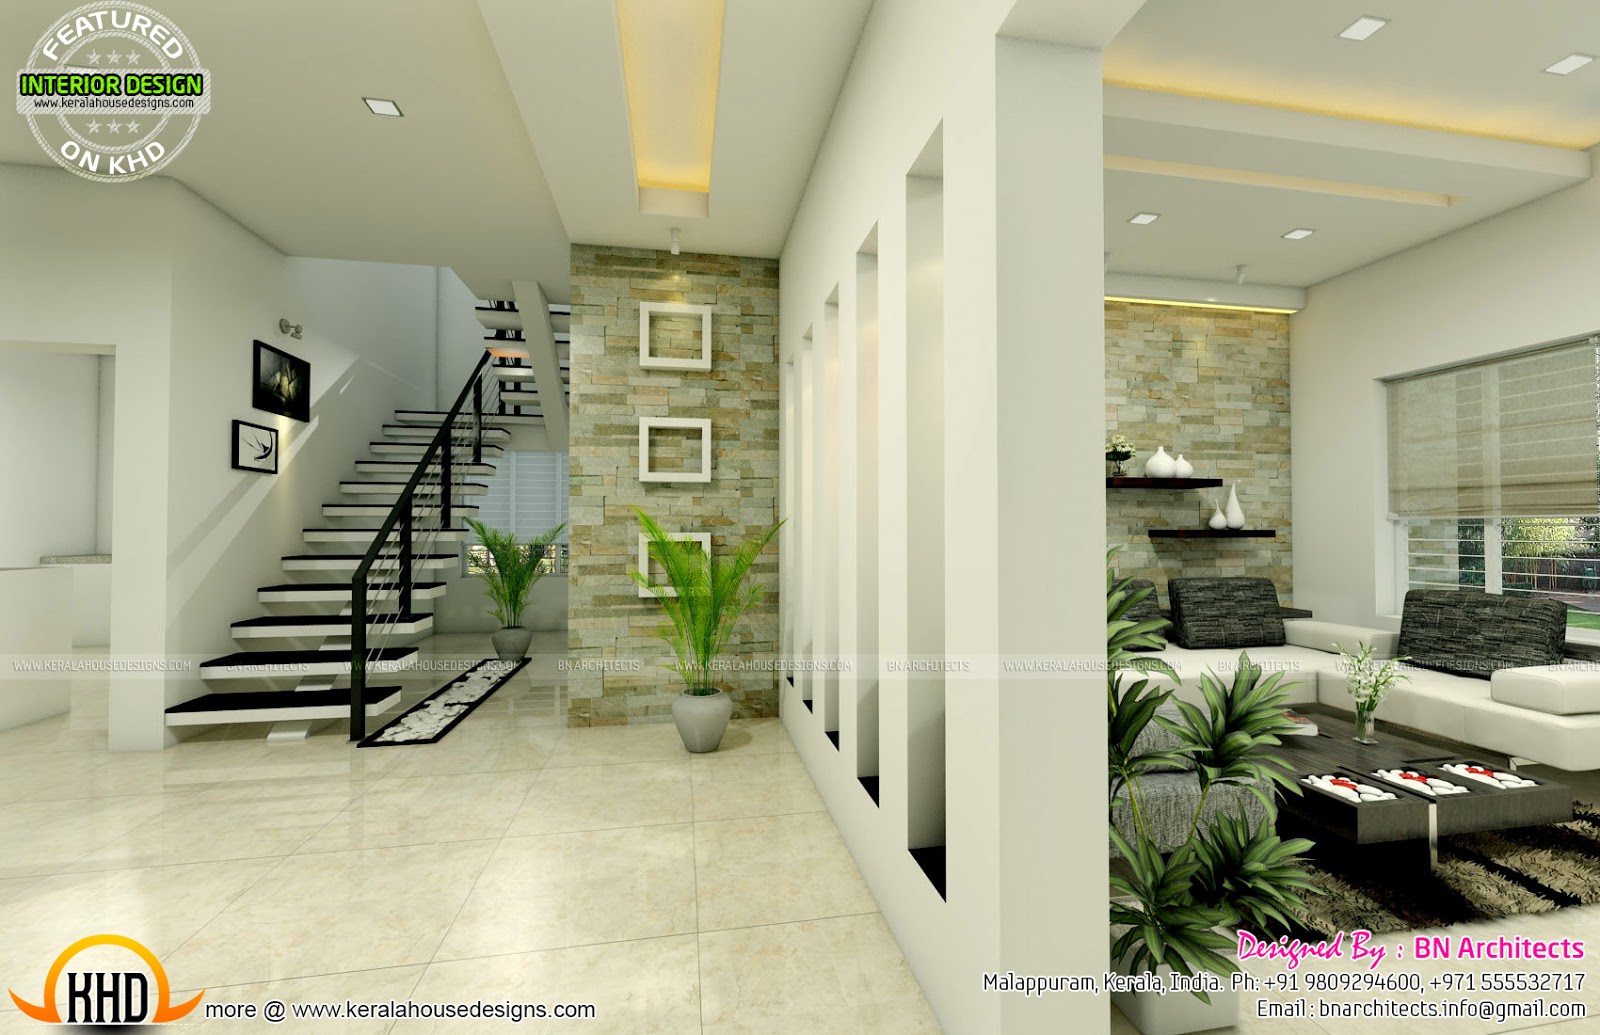 All in one  House  elevation floor  plan  and interiors 